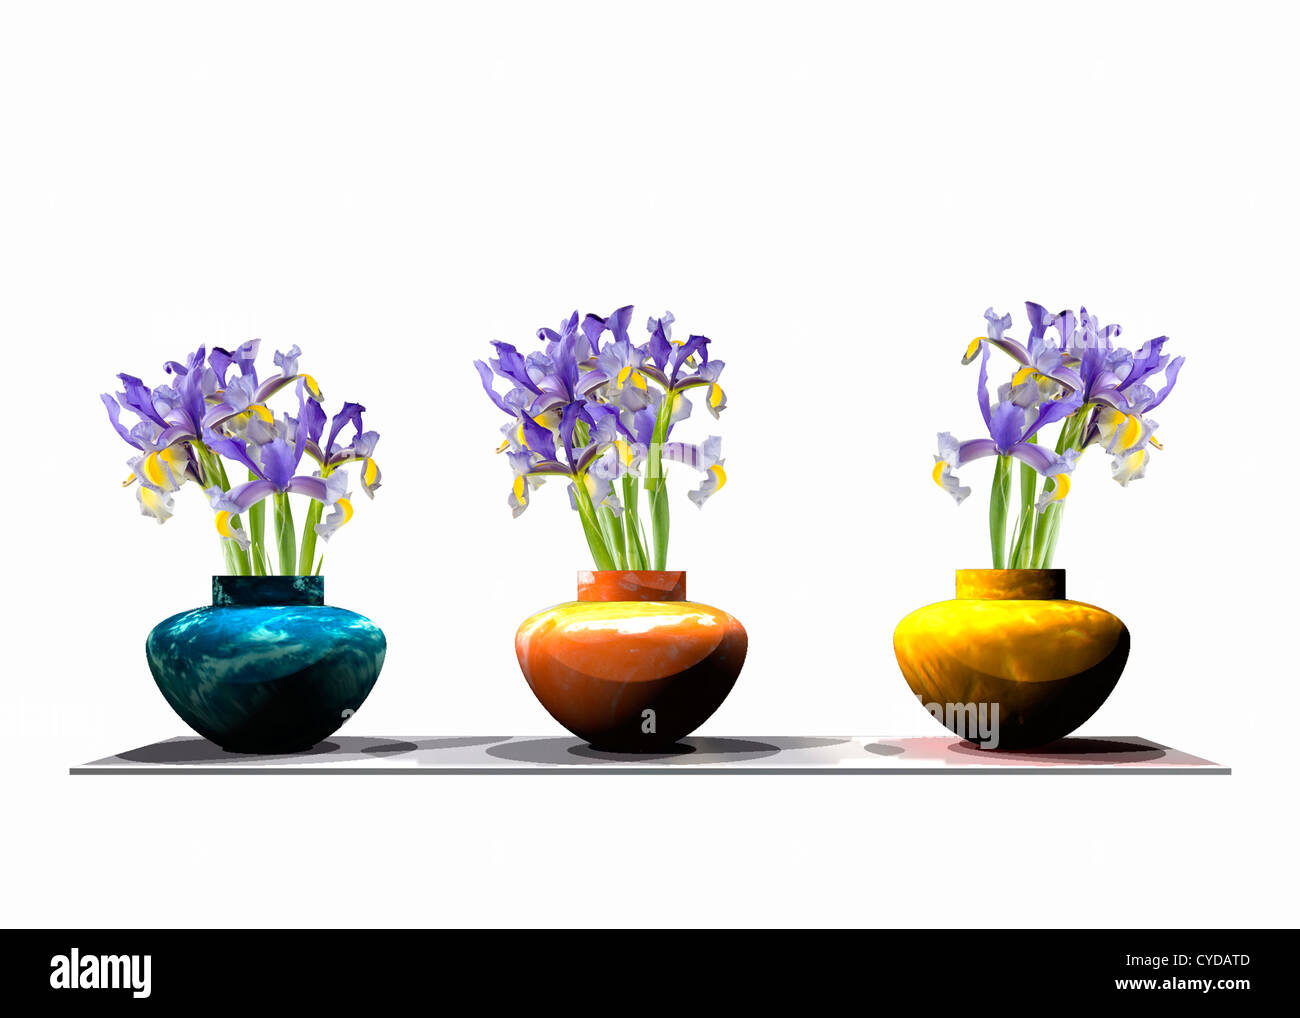 Three vases filled with bunches of iris flowers. Stock Photo